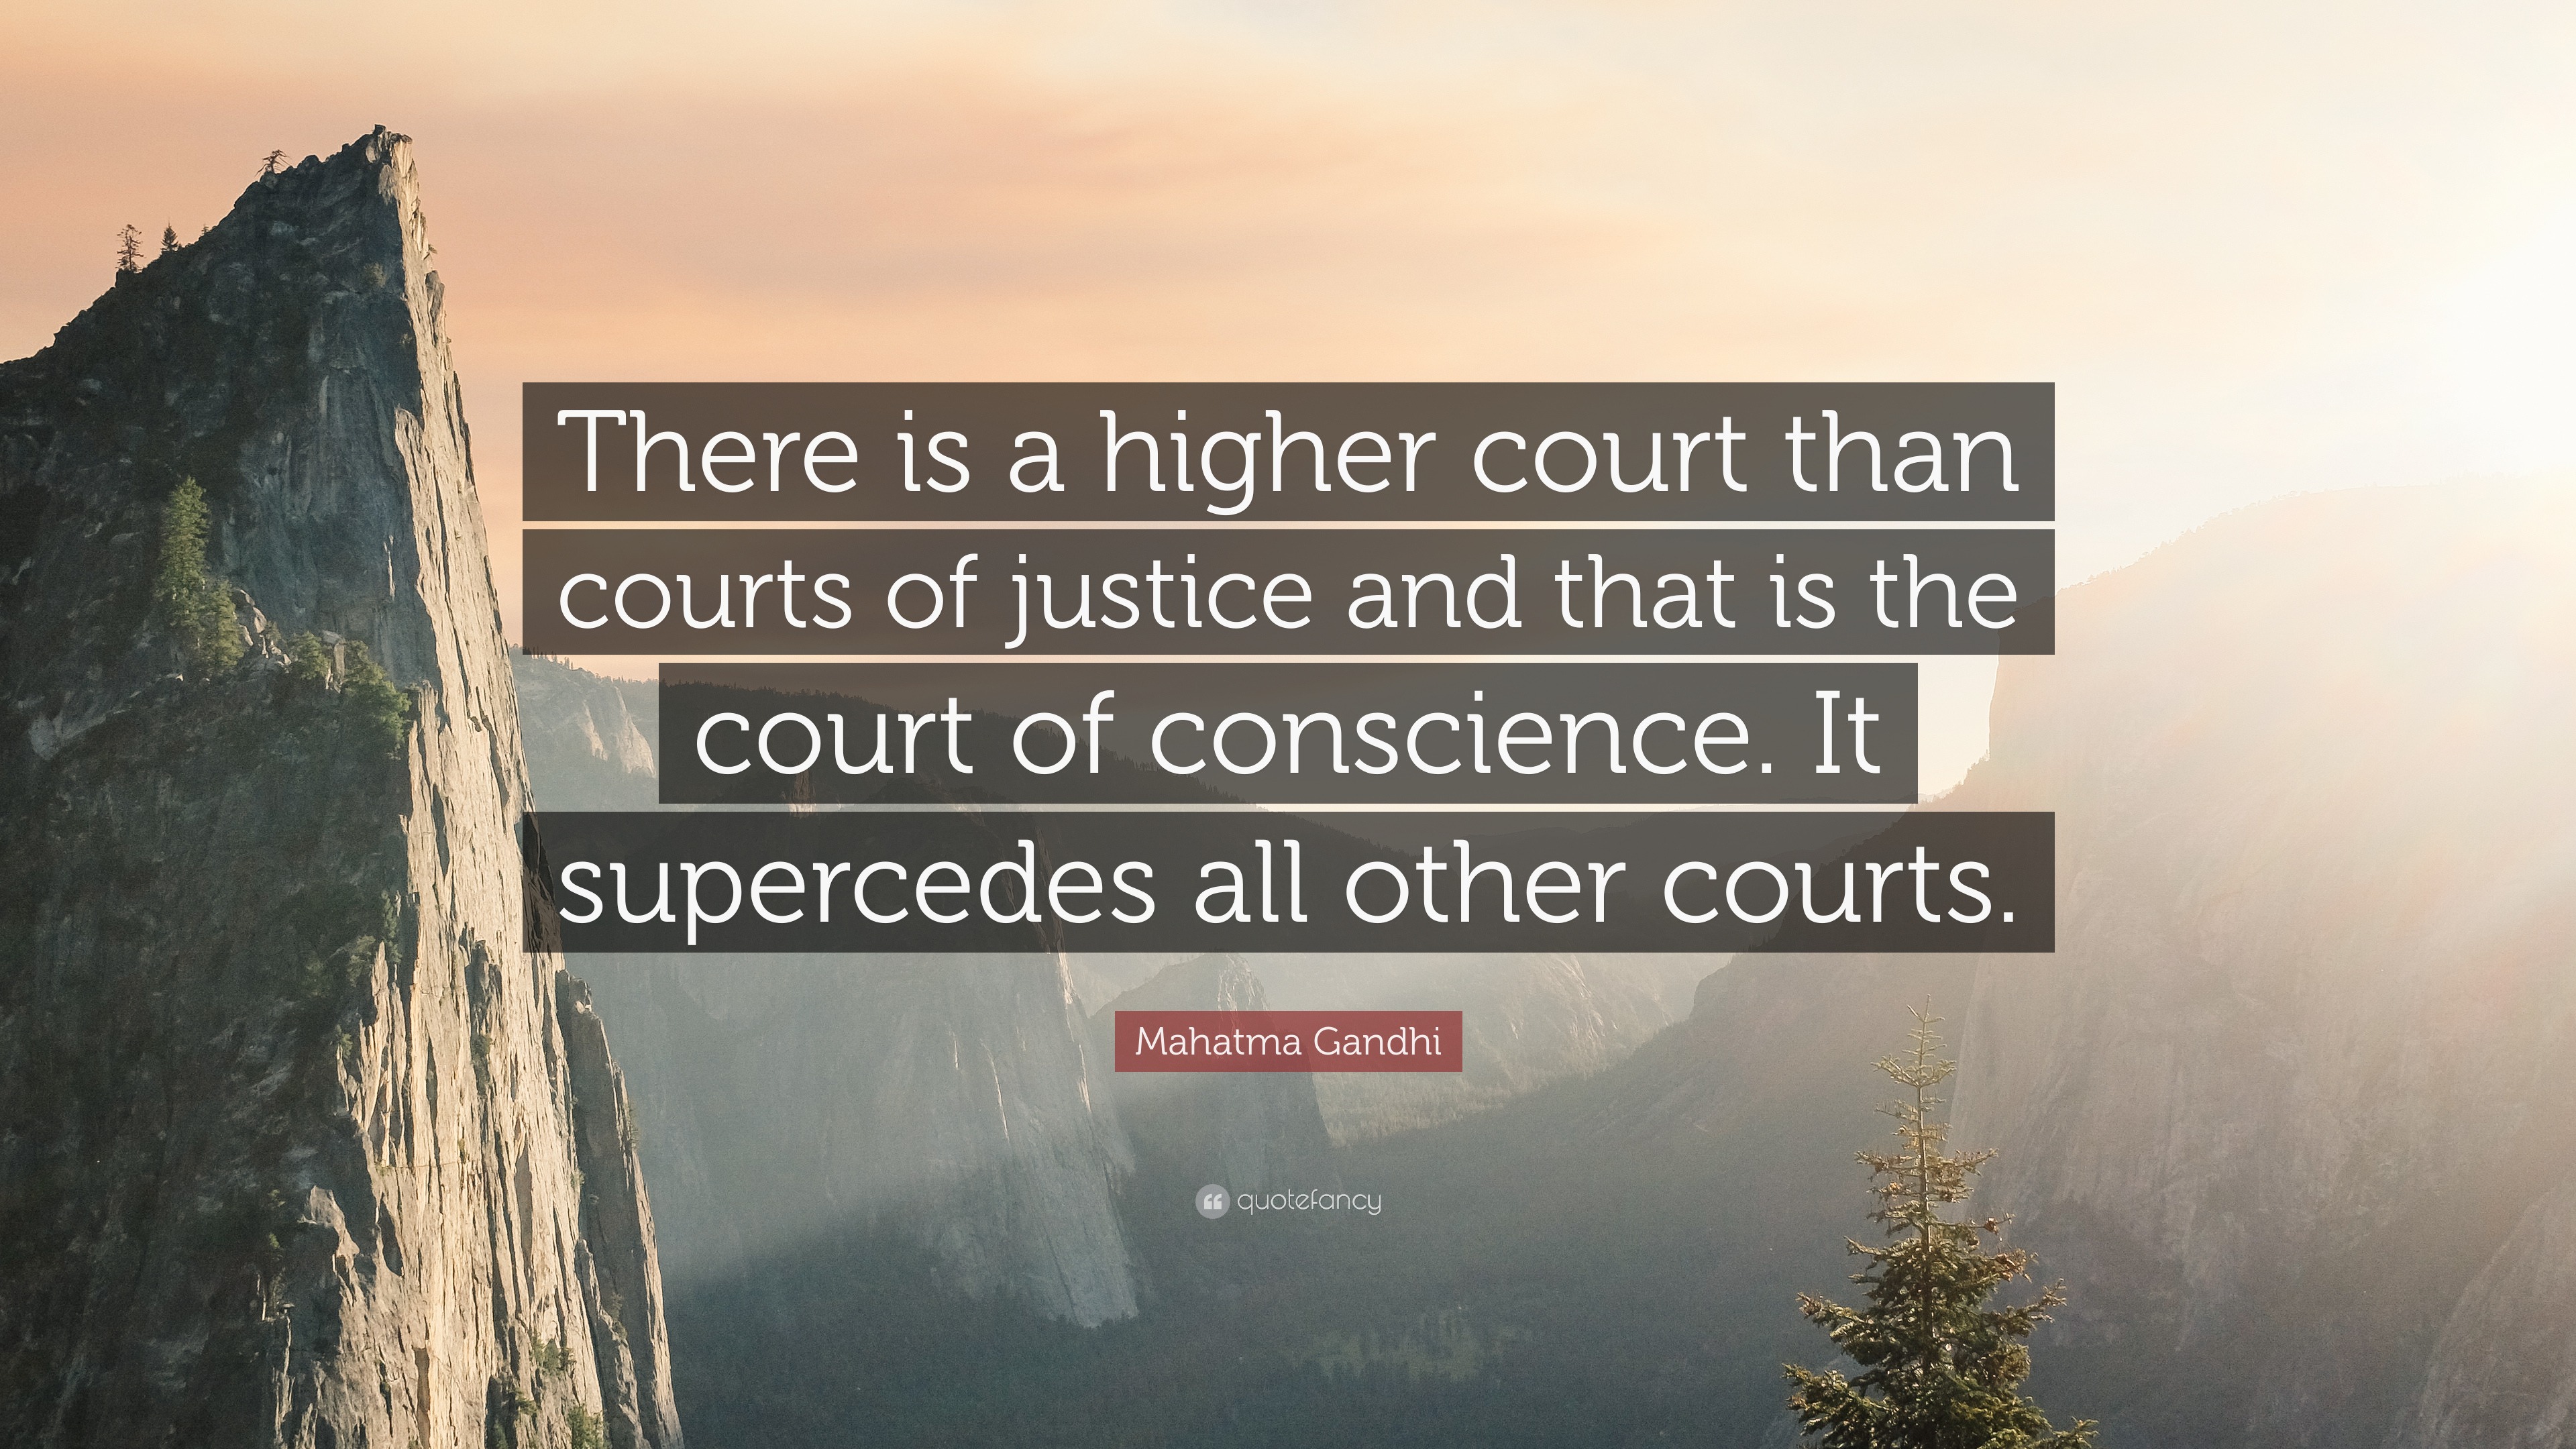 Mahatma Gandhi Quote: There is a higher court than courts of justice